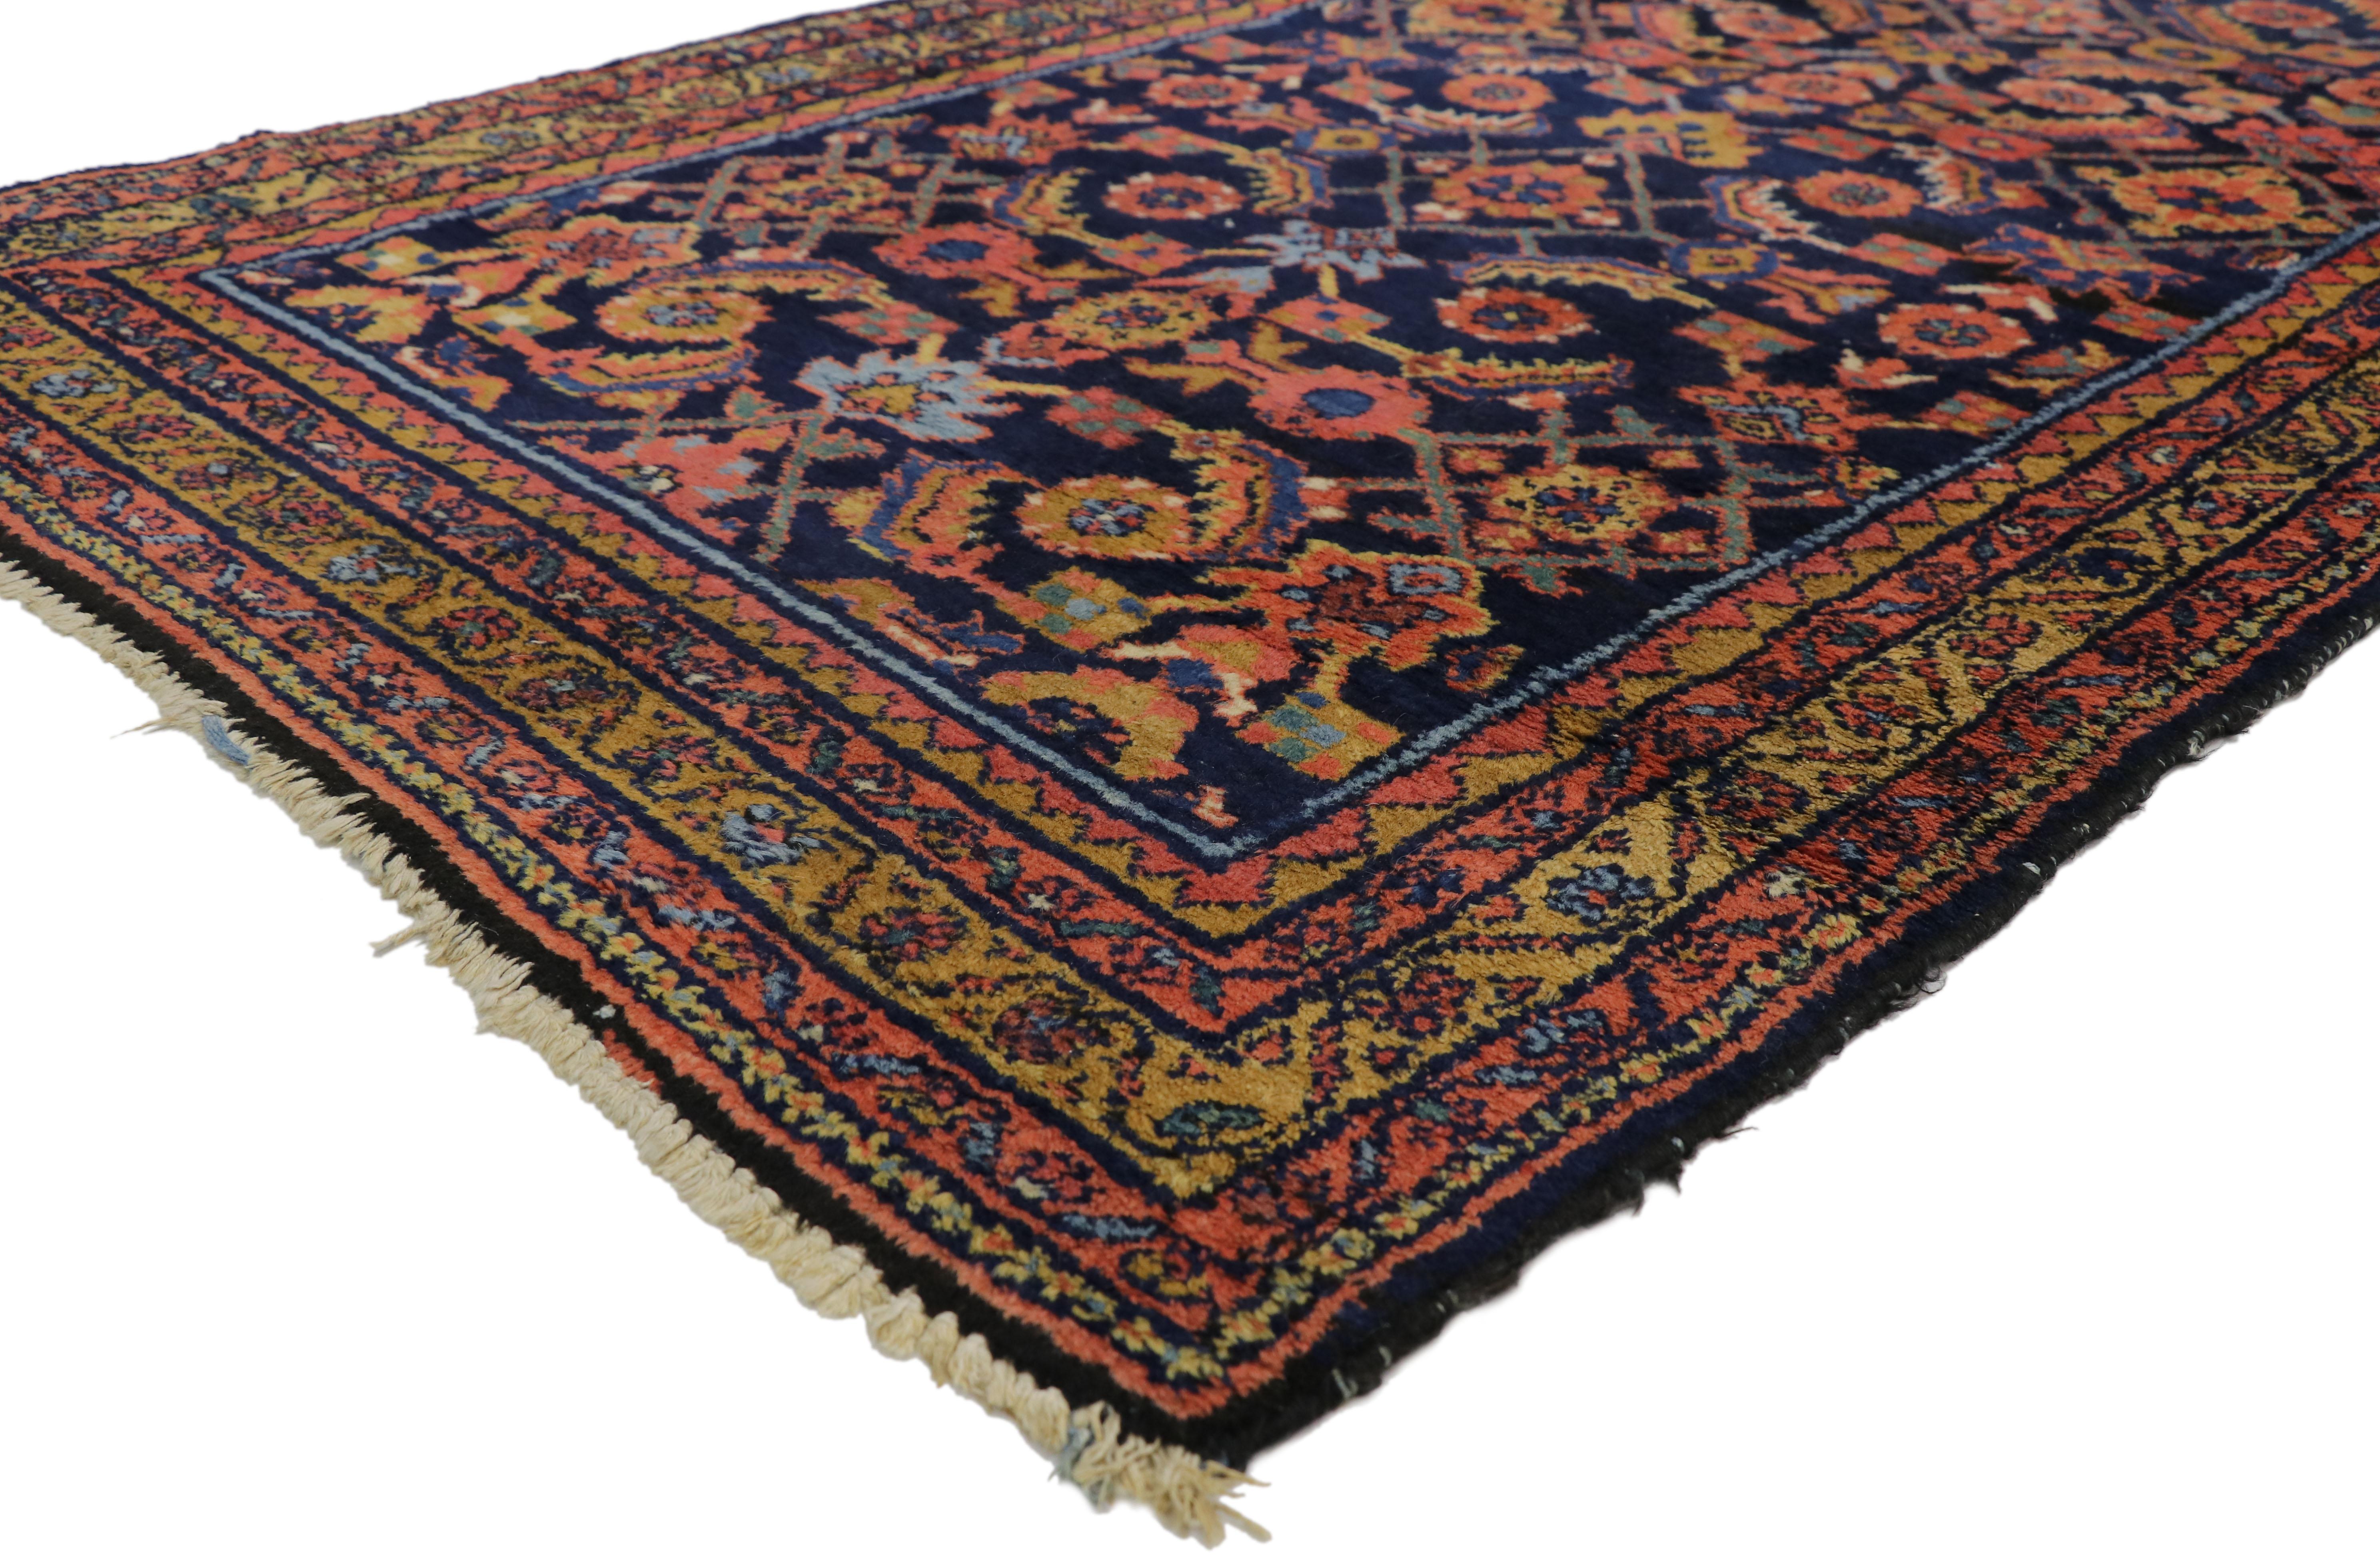 76805 Antique Persian Malayer Runner with Modern Victorian Style, Extra-Long Hallway runner 03'07 x 17'01. This hand-knotted wool antique Persian Malayer runner features an all-over Herati pattern on an abrashed ink blue field. The classic Herati